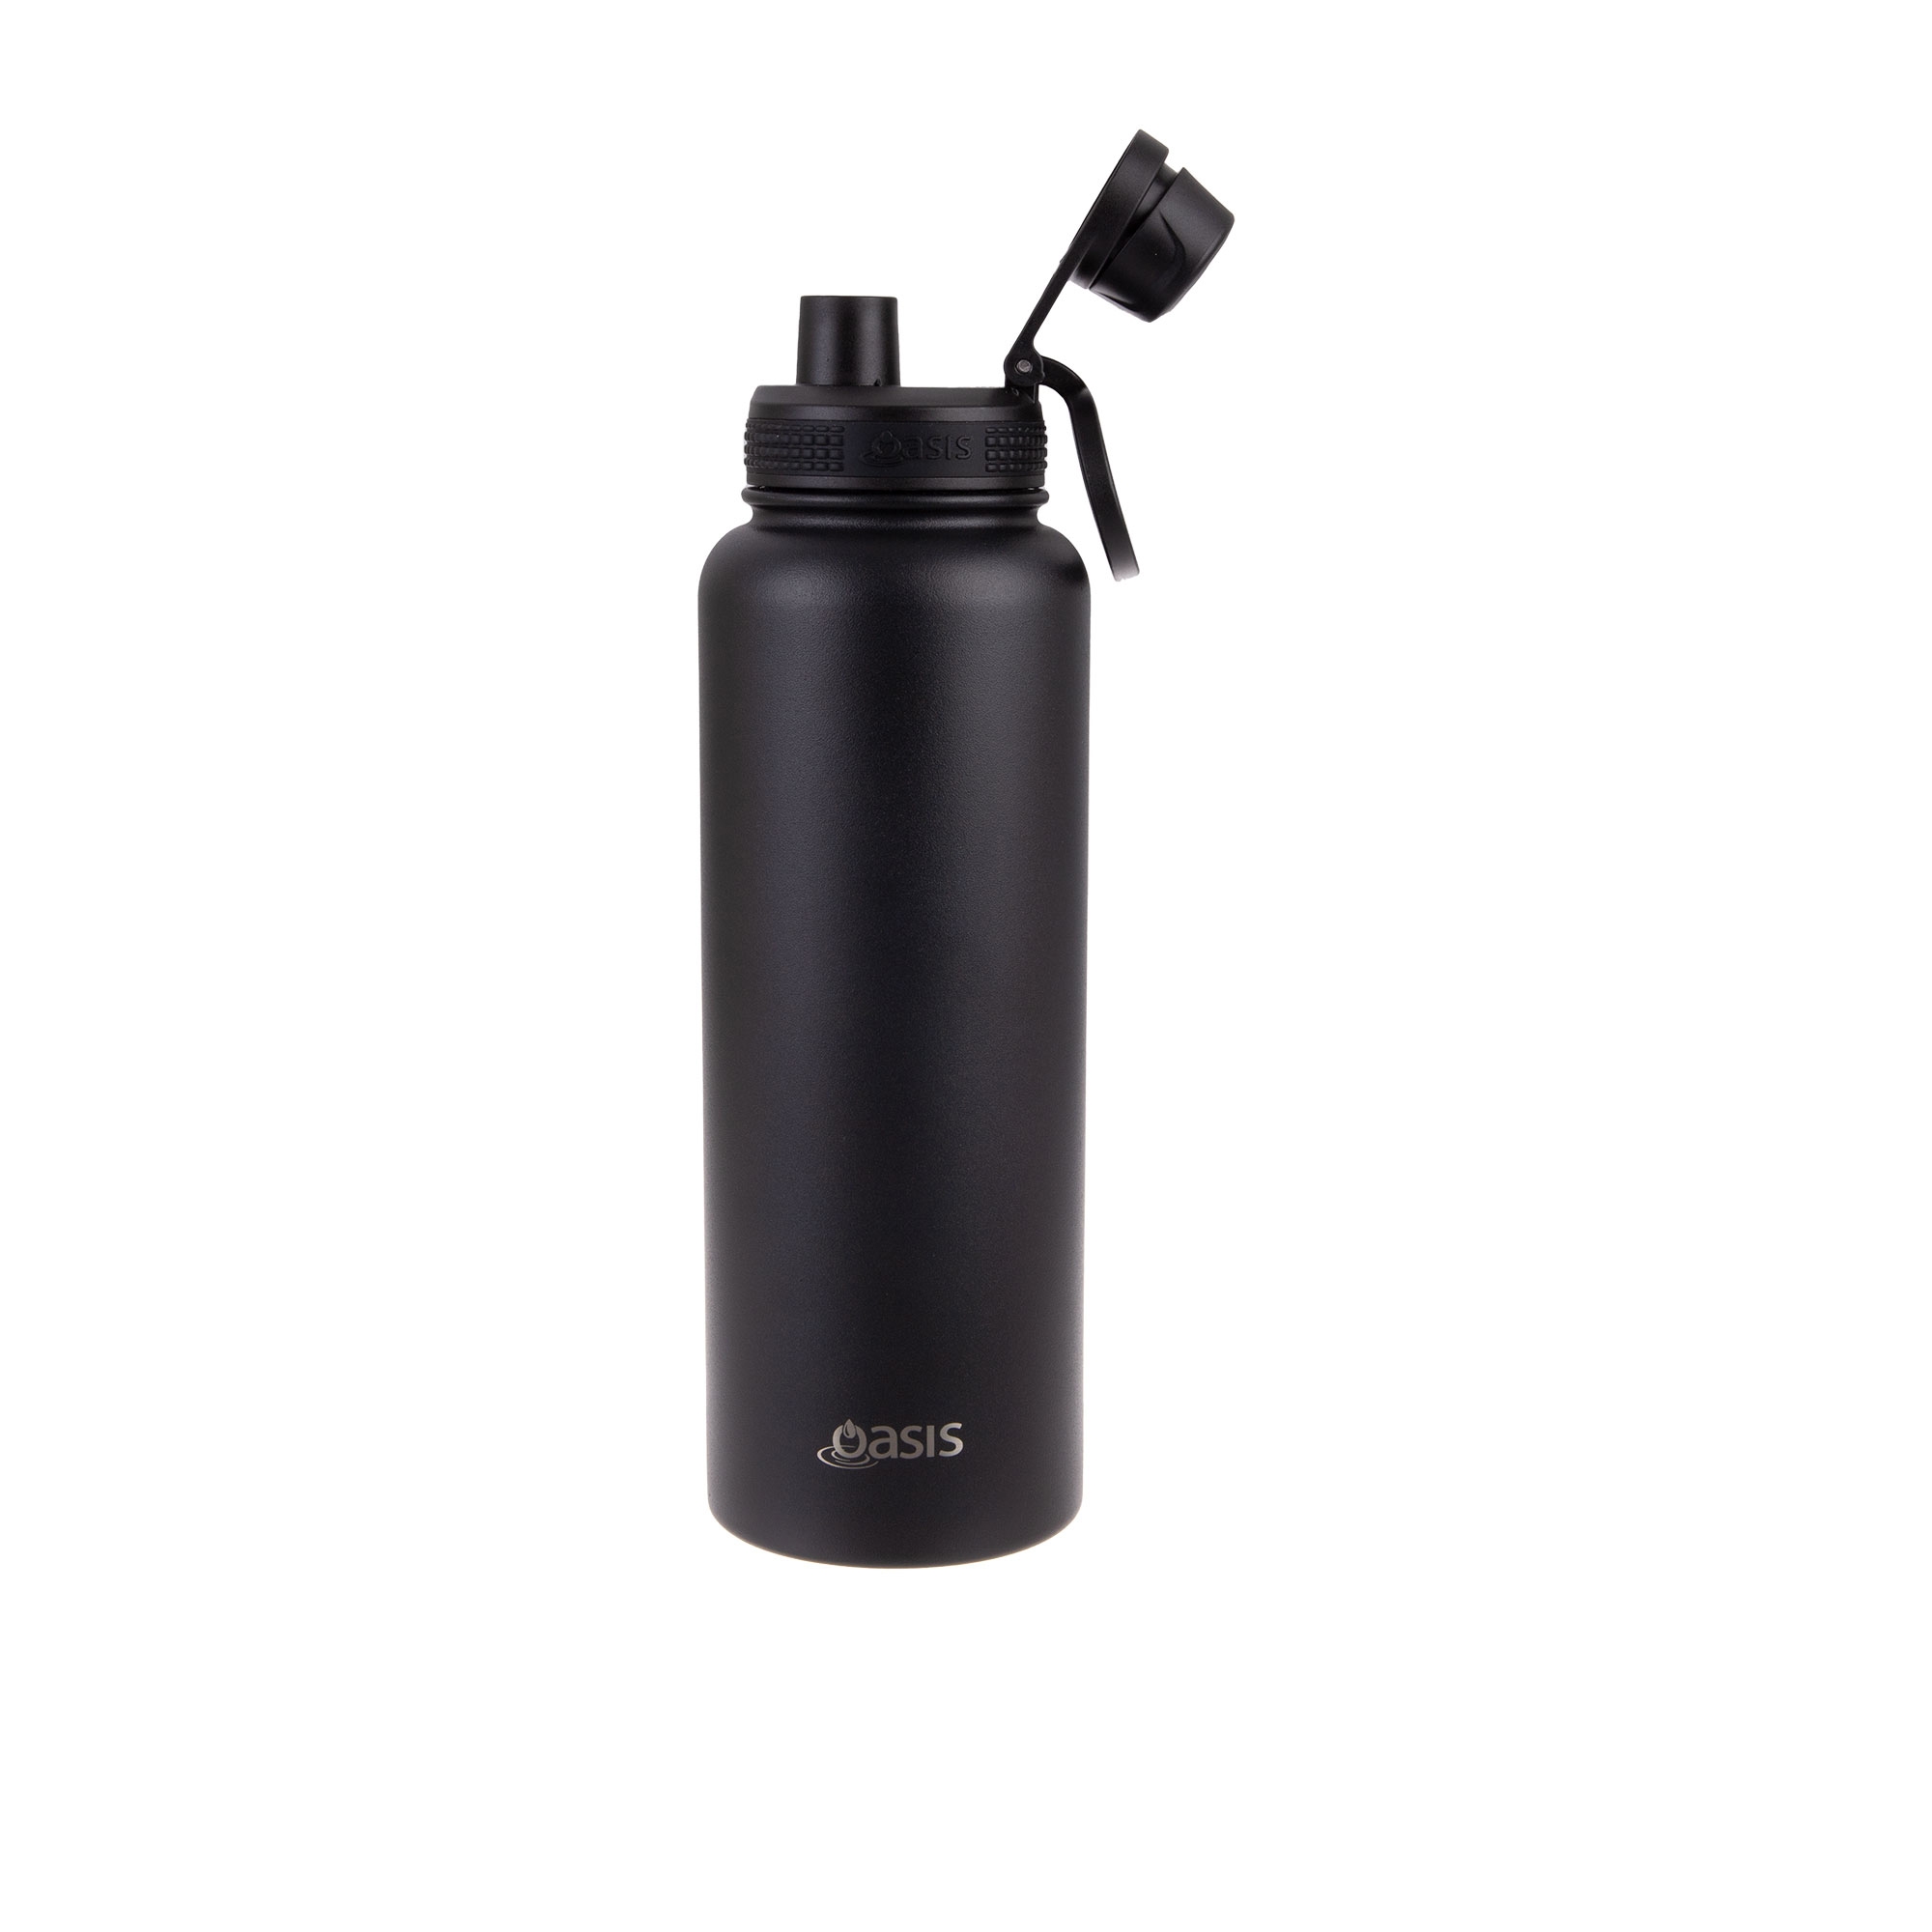 Oasis Challenger Double Wall Insulated Sports Bottle 1.1L Black Image 2